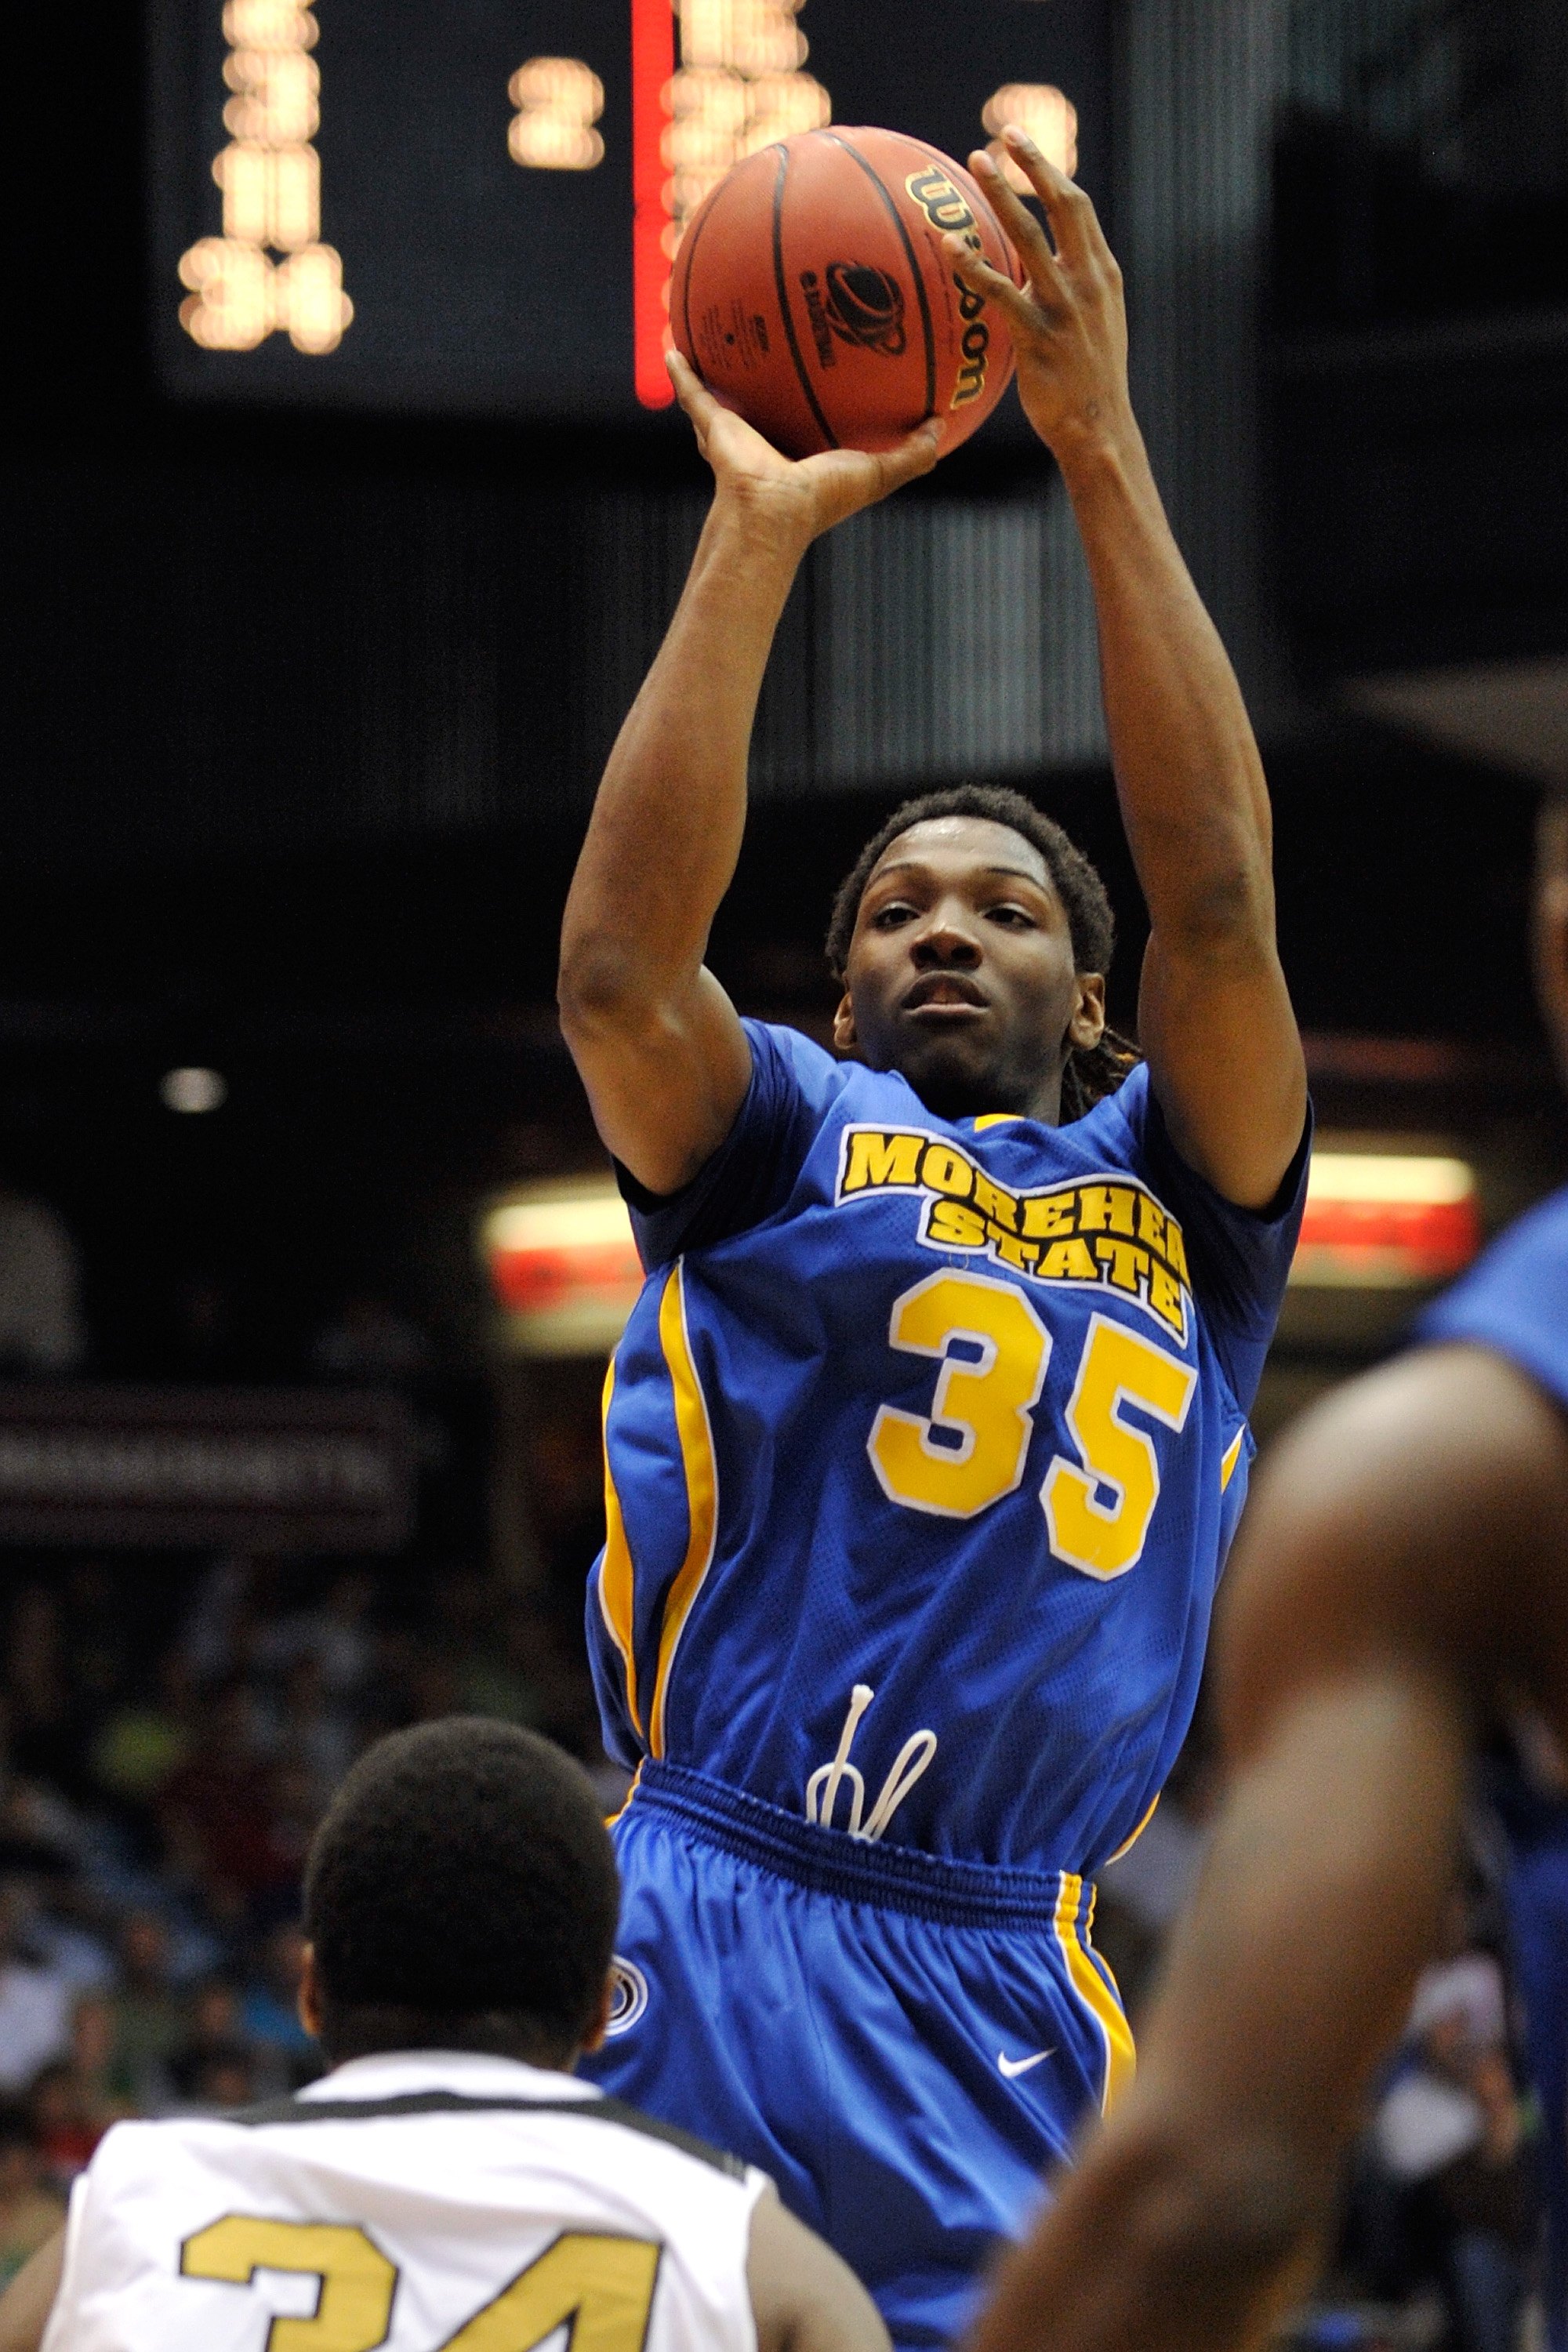 DAYTON, OH - MARCH 17:  Kenneth Faried #35 of the Morehead State Eagles takes a shot against the Alabama State Hornets during the opening round of the Men's NCAA Tournament on March 17, 2009 at the University of Dayton Arena in Dayton, Ohio.  (Photo by Ja